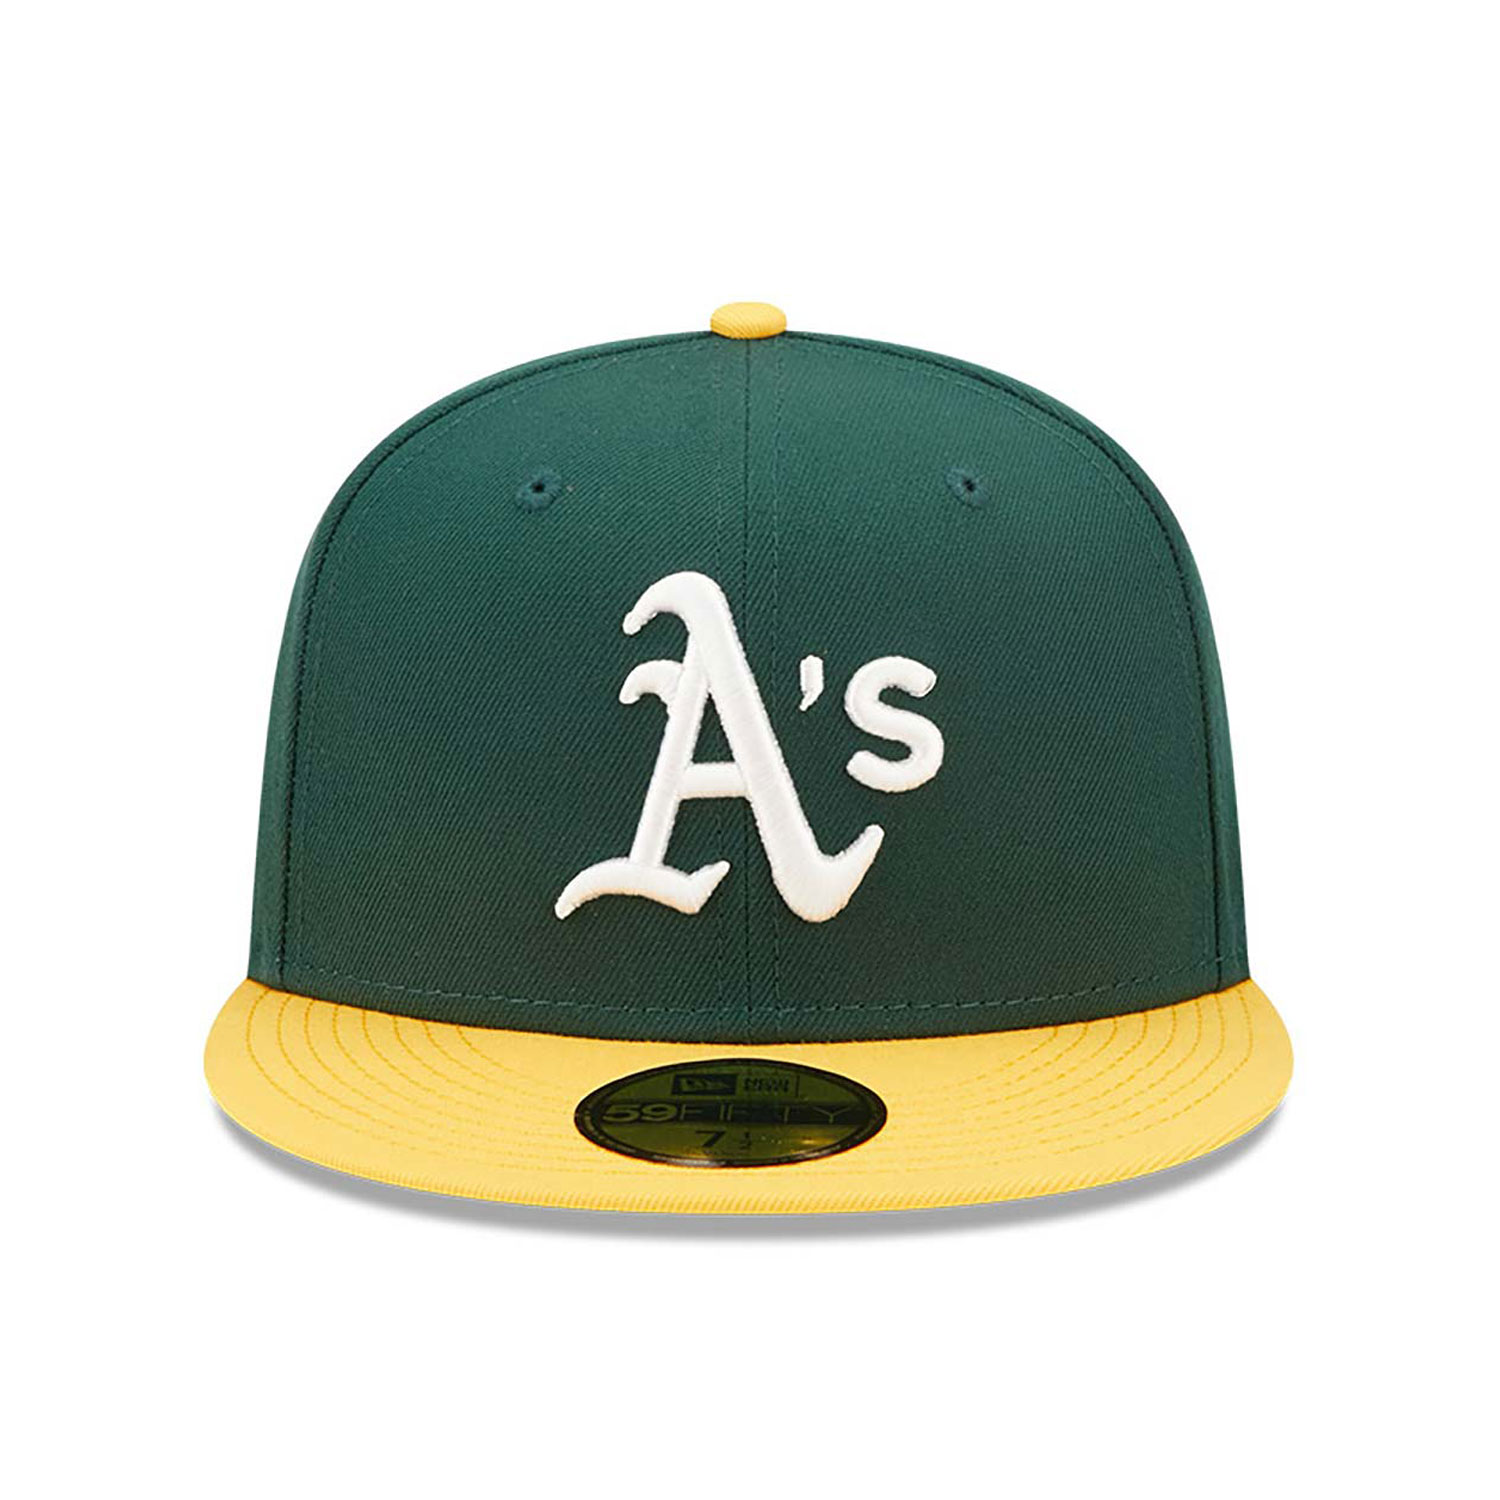 Oakland Athletics MLB Dark Green 59FIFTY Fitted Cap